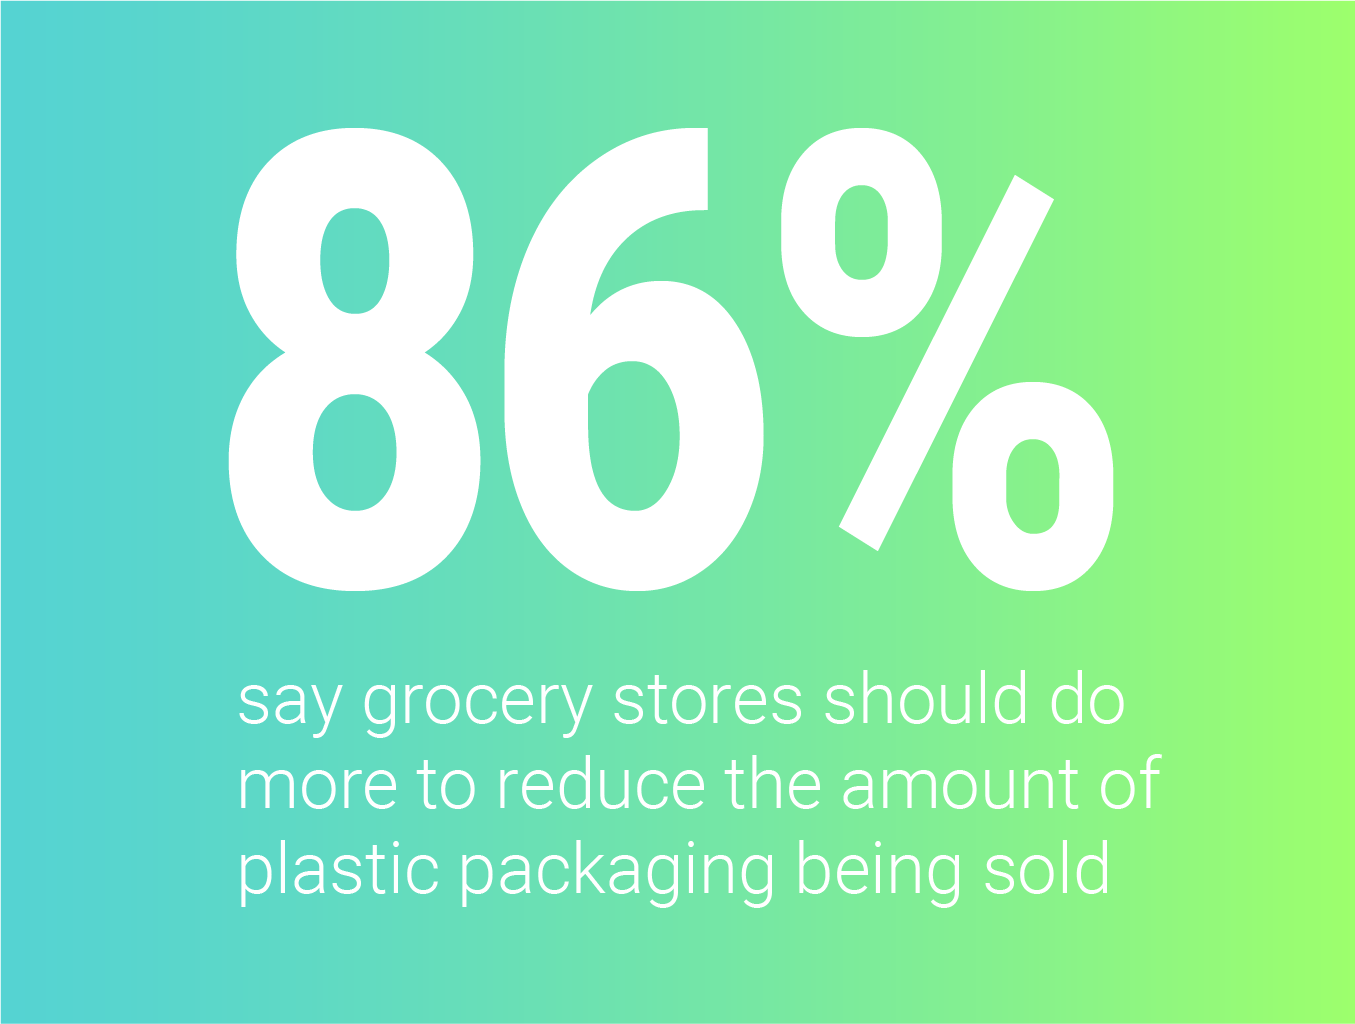 •	86% say grocery stores should do more to reduce the amount of plastic packaging being sold